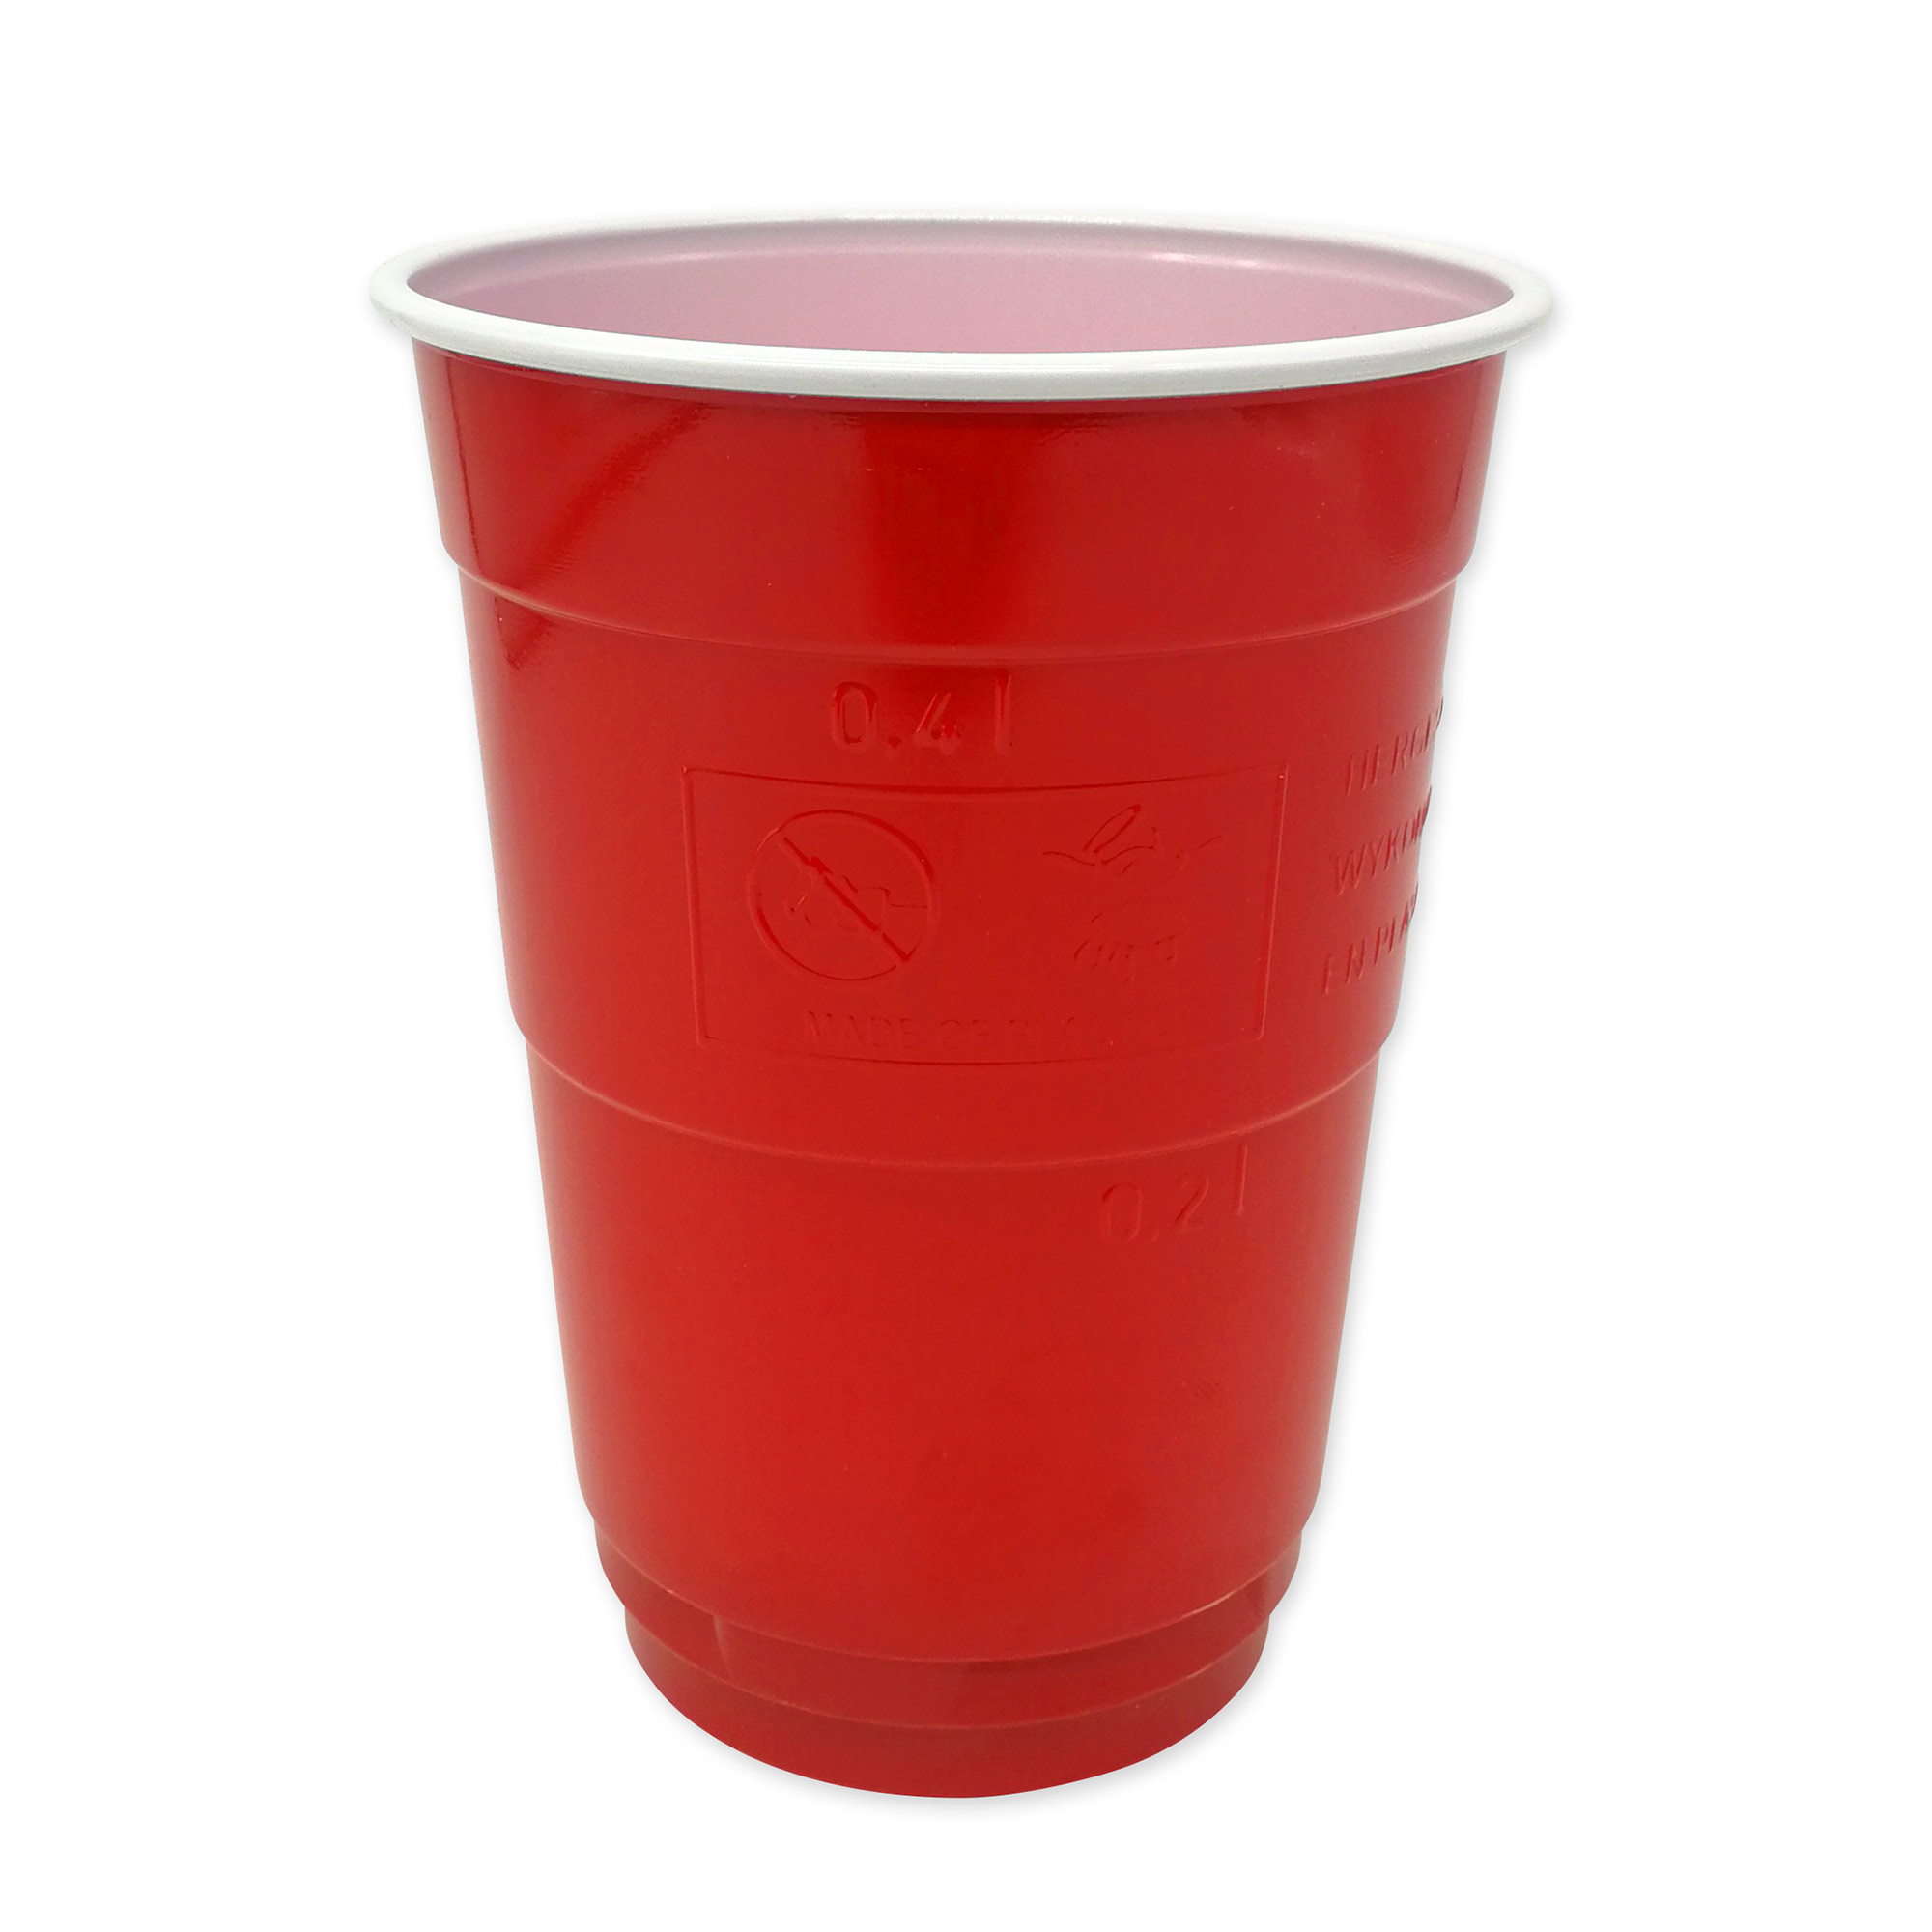 Cup, Partybeker rood-wit, 400 ml | Bechershop NL